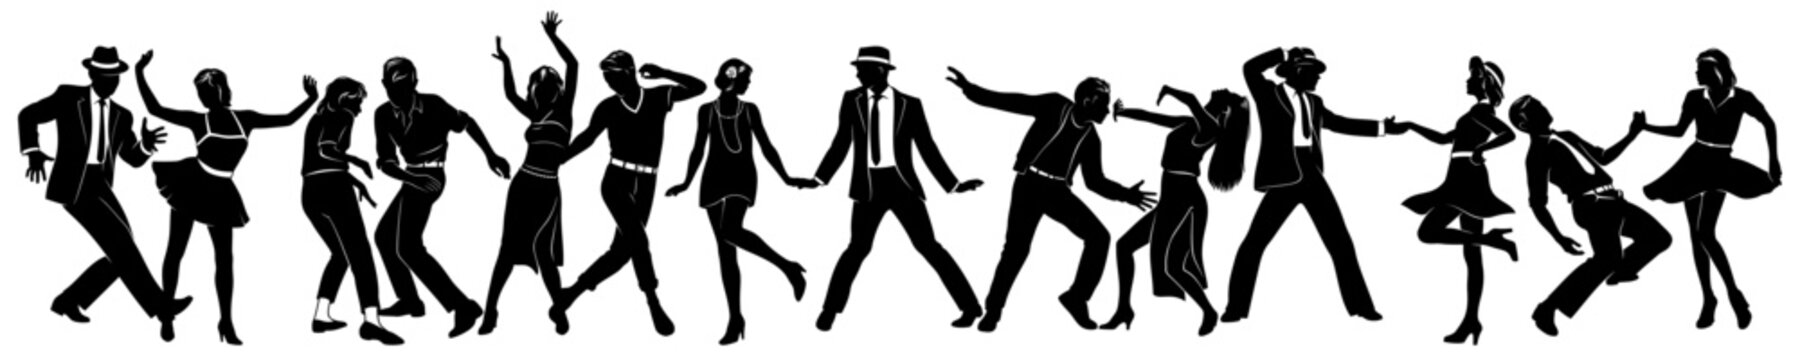 Dancing People Silhouettes Set. Swing, Twist, Charleston, Disco Dancers. All figures are separate and fully completed. Can be used alone, in pairs or groups. Vector cliparts isolated on white.